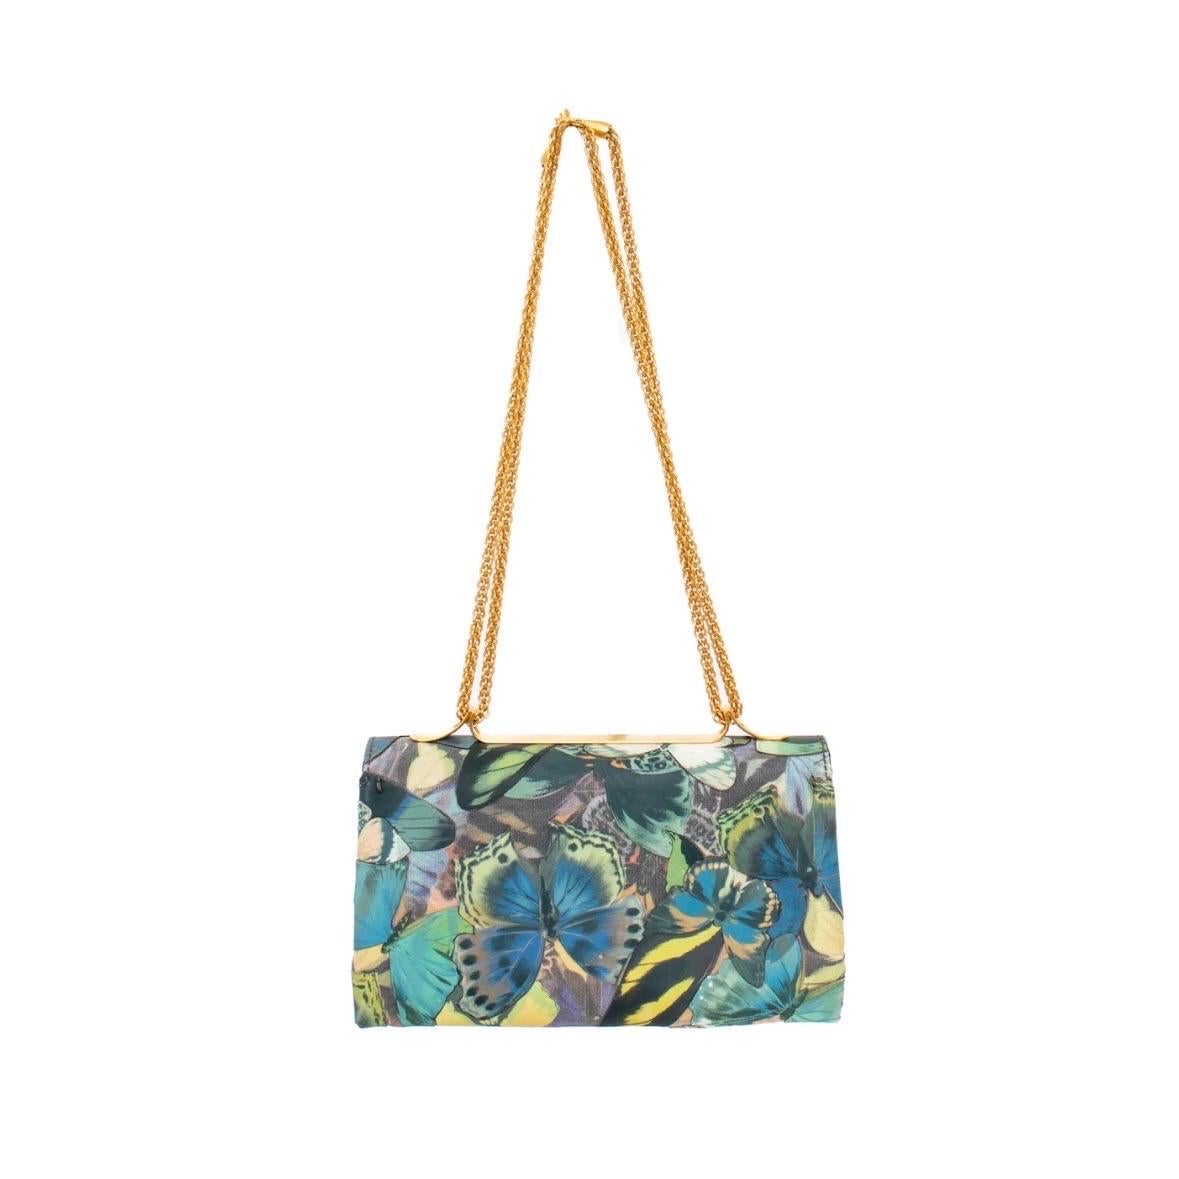 Butterfly print tote by Valentino
Made in Italy
Multicolored
Butterfly cut-out appliques 
Gold hardware
Inner zippered pocket
Leather lining
Snap closure with decorative gold butterflies
Strap adjustable; can be doubled or worn on shoulder